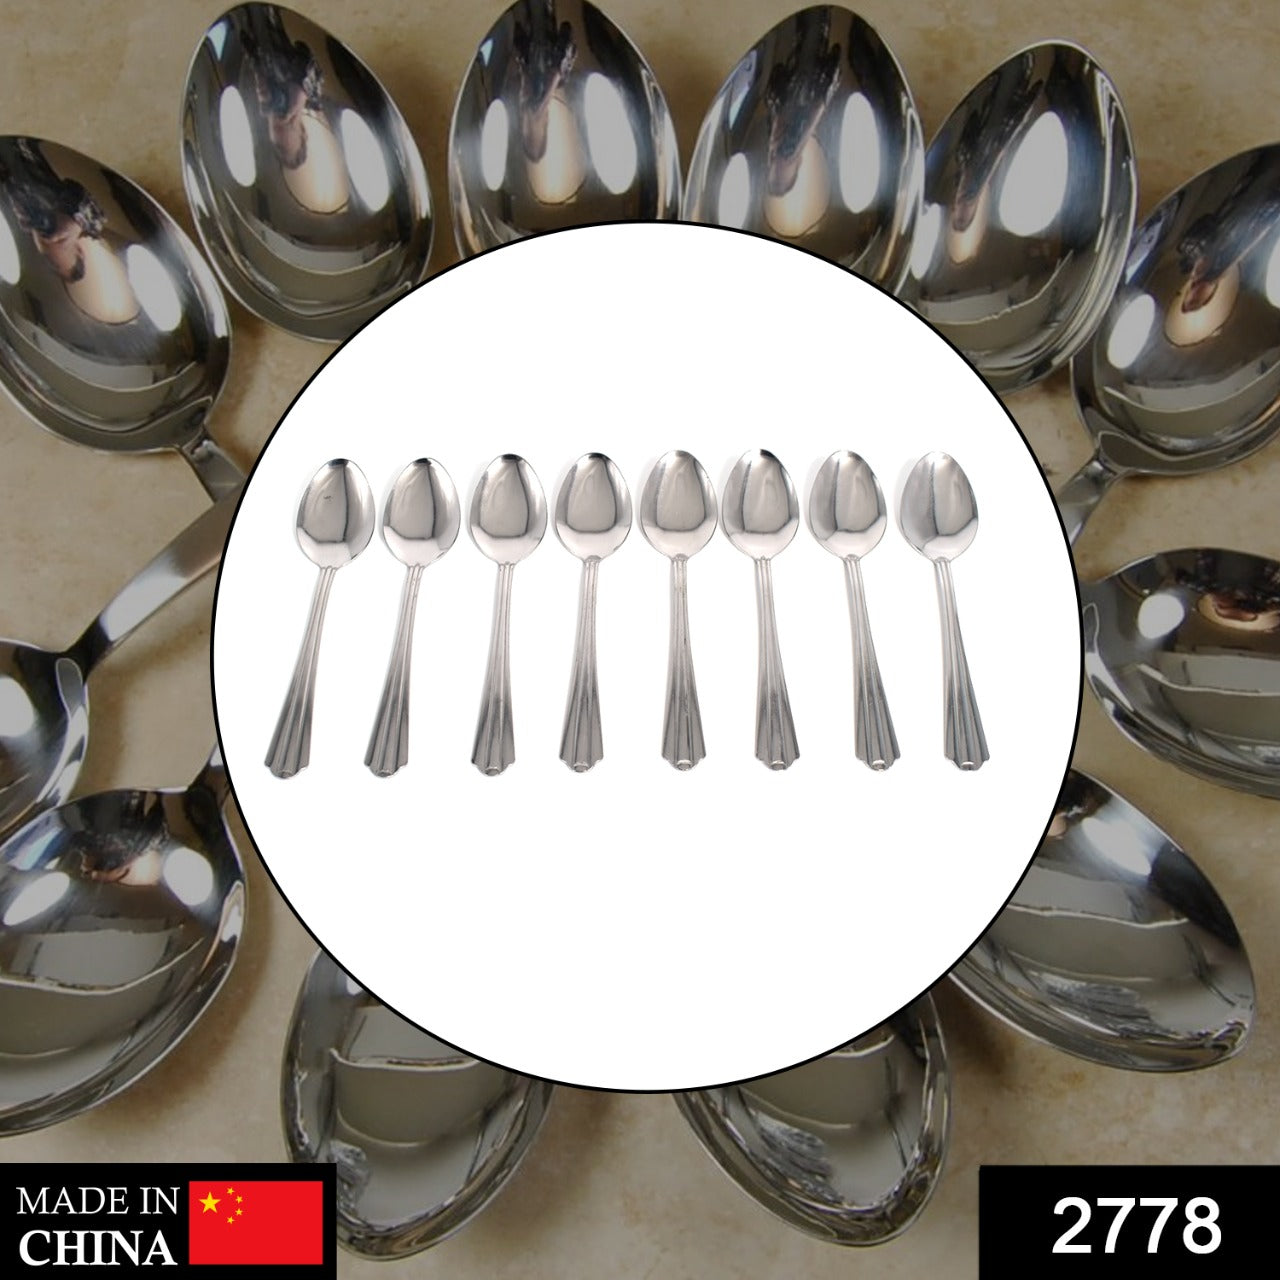 2778 set of 8Pc Dinner Spoons for home/kitchen